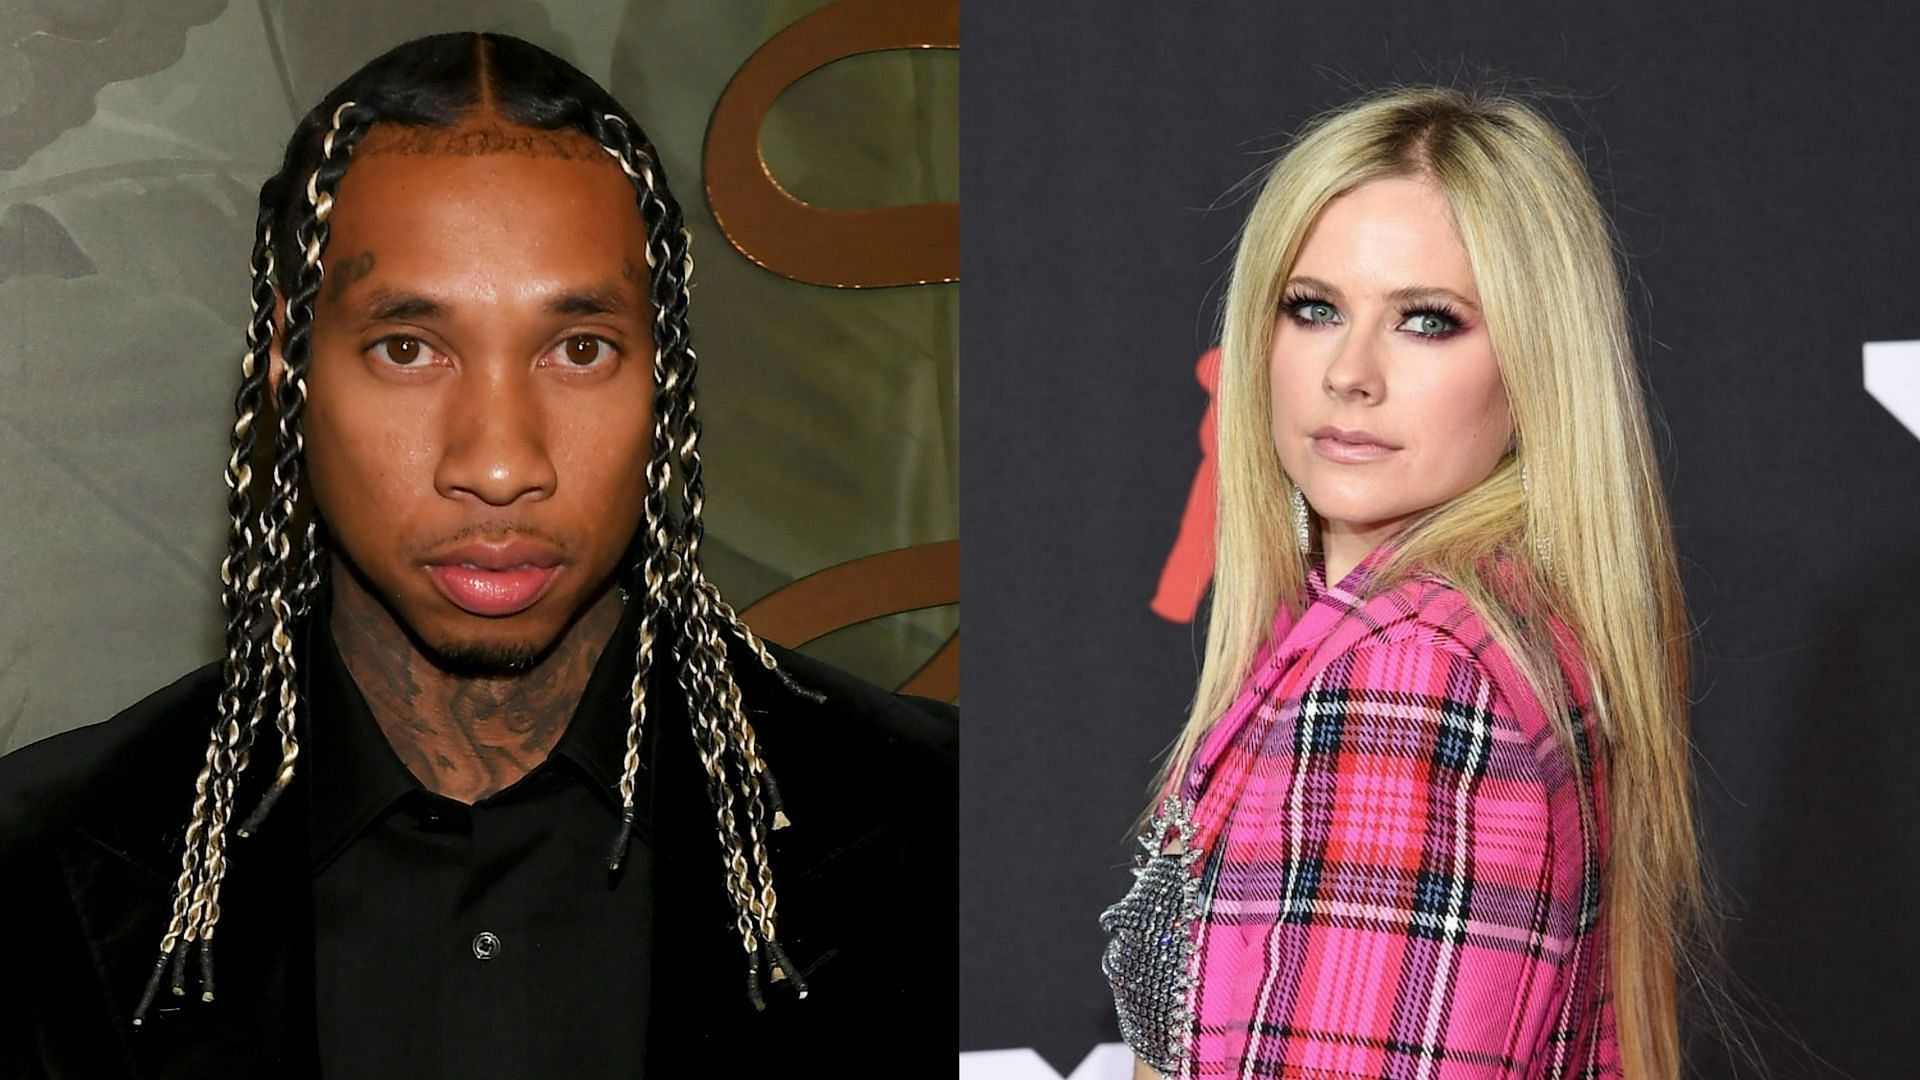 Thought She Was Engaged To Mod Sun Hilarious Avril Lavigne And Tyga Reactions Erupt Amid 